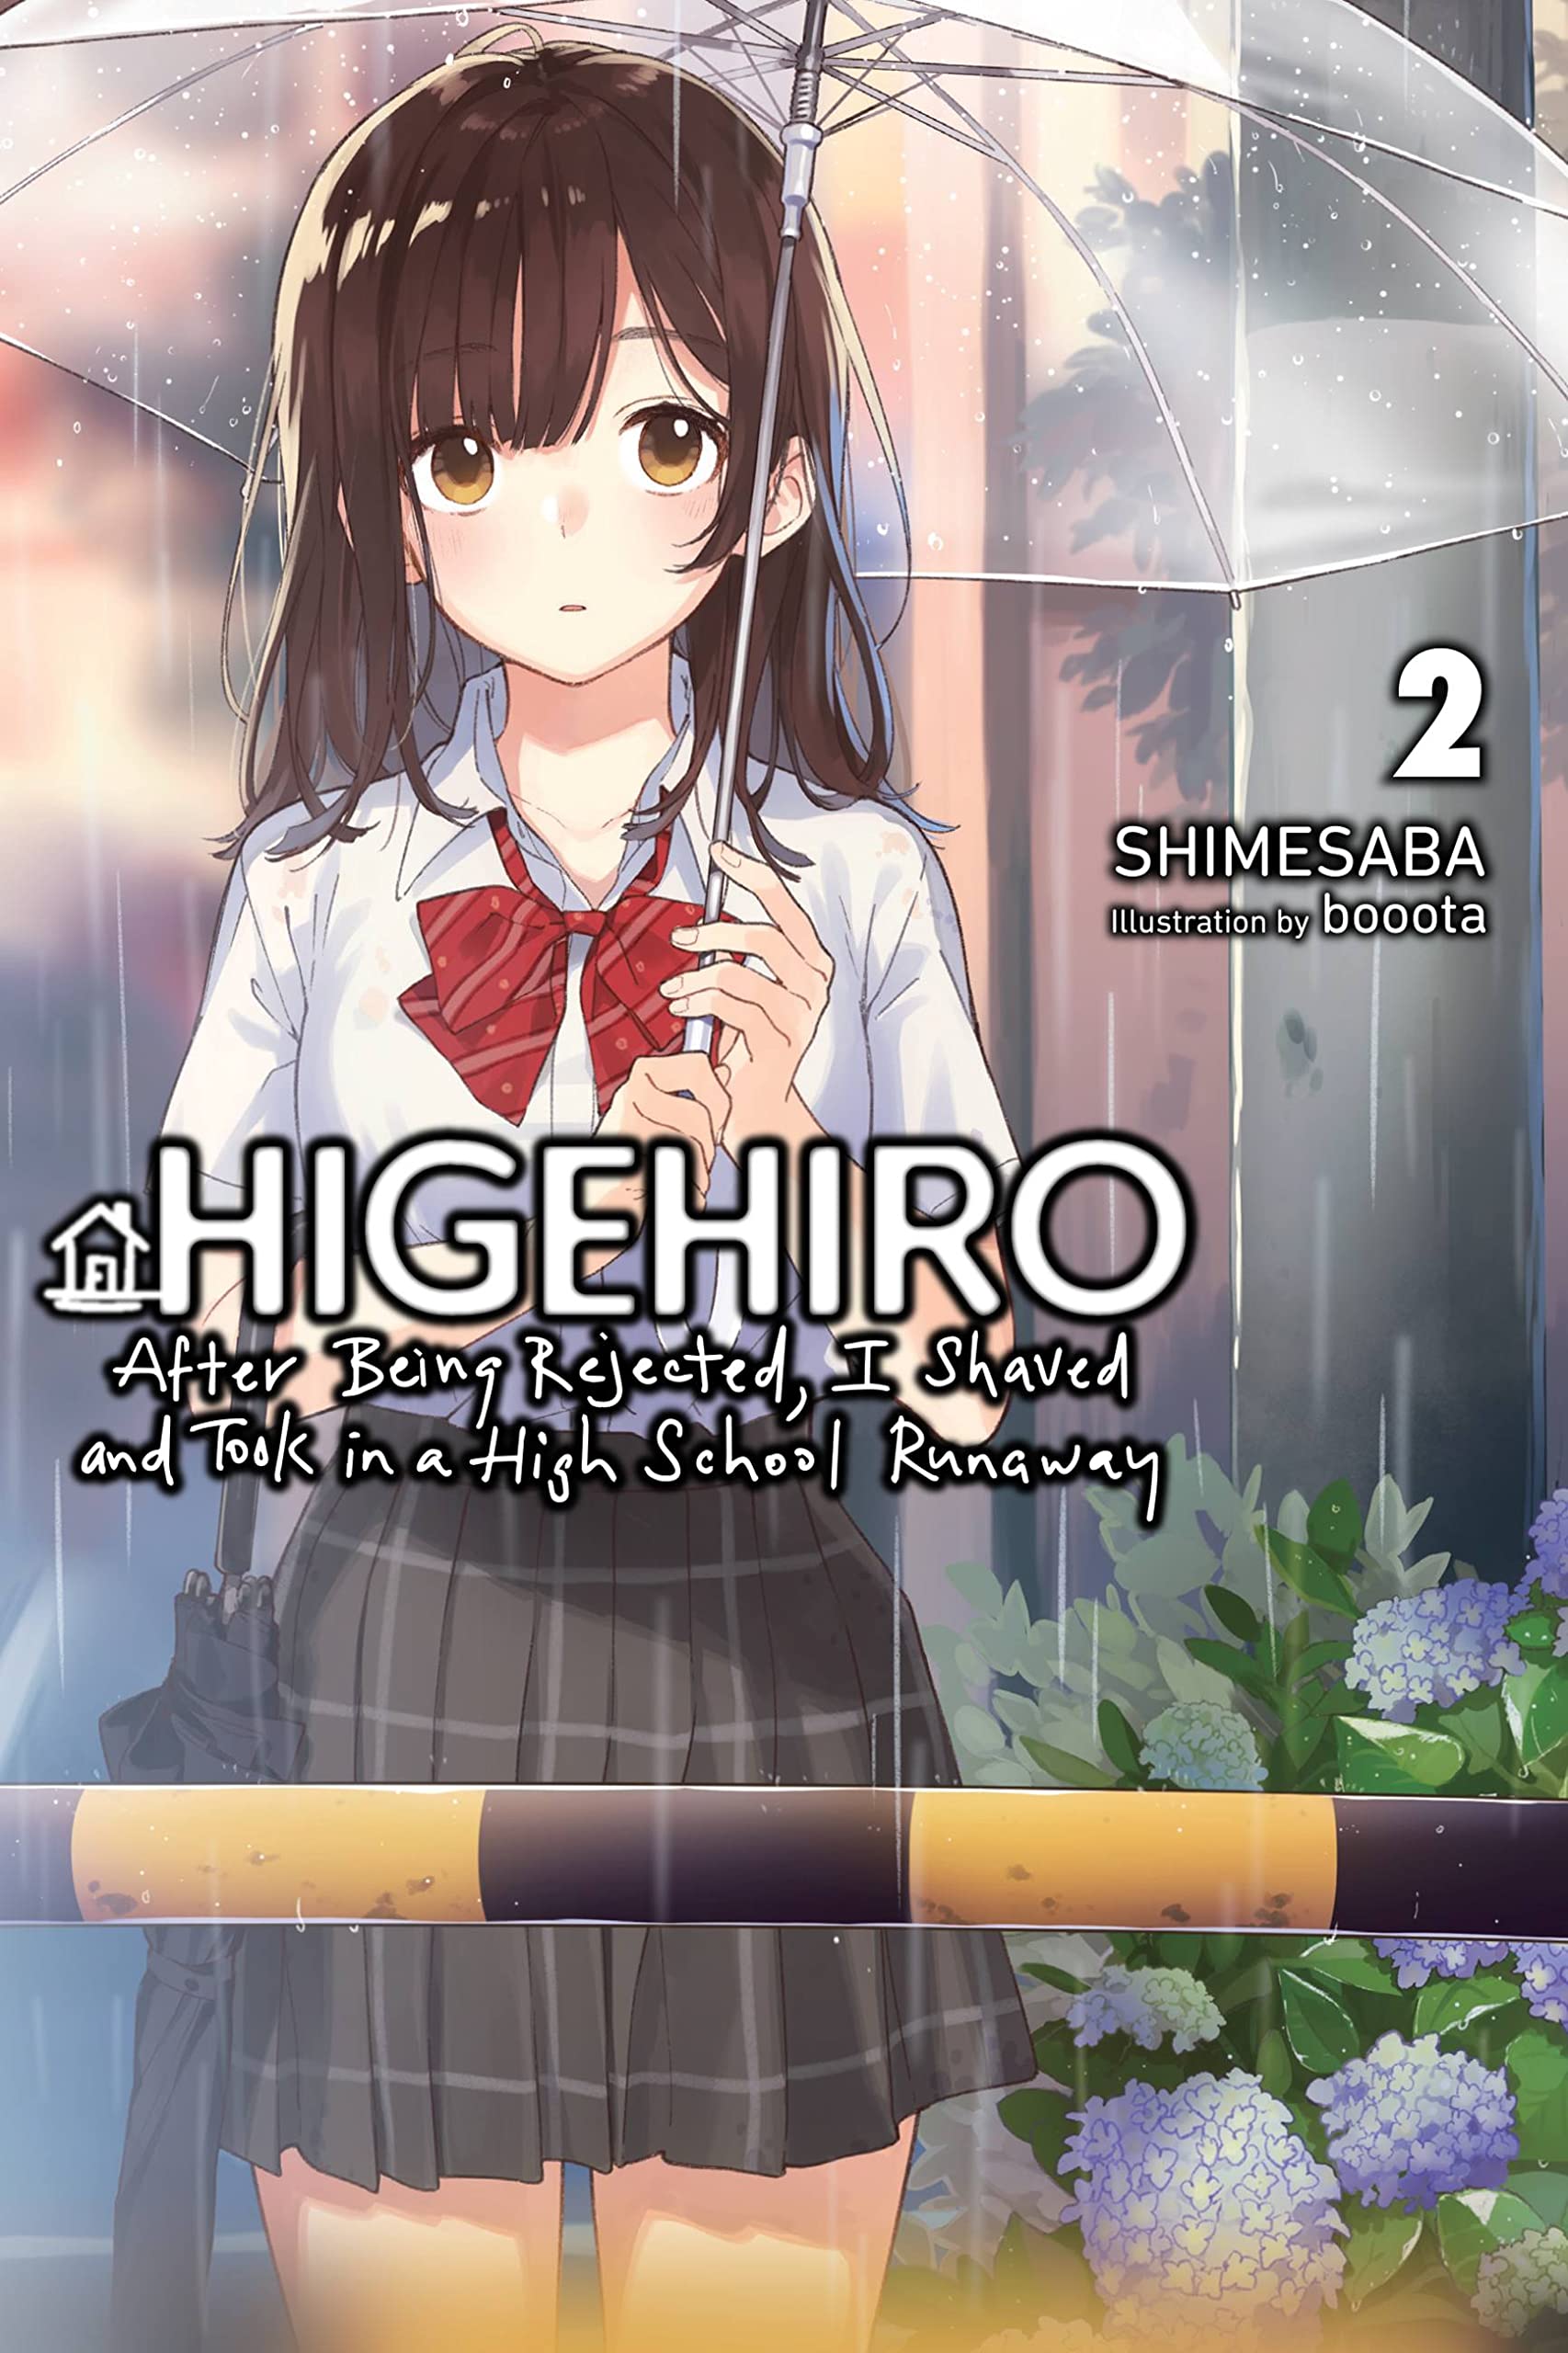 Higehiro: After Getting Rejected, I Shaved and Took in a High School Runaway Vol. 02 (Light Novel)